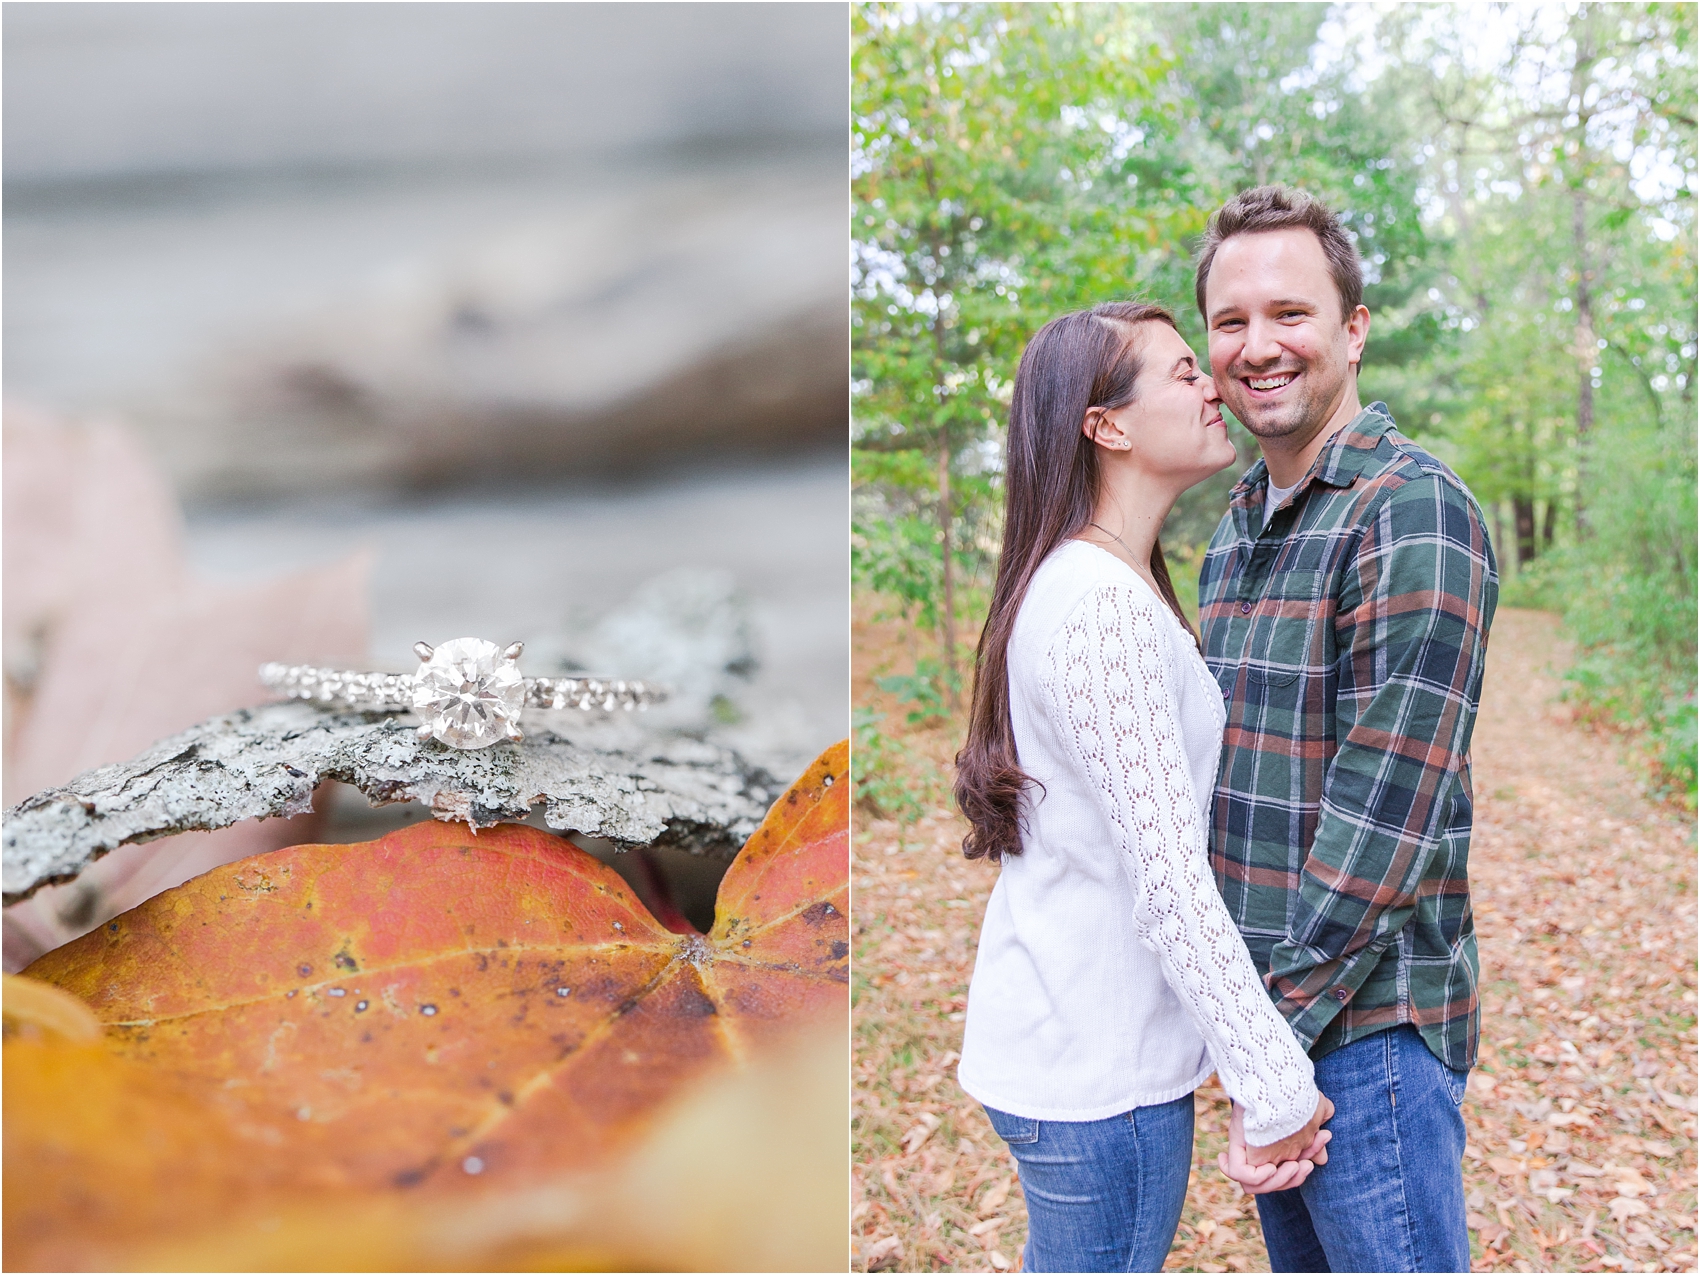 relaxed-autumn-engagement-photos-at-hudson-mills-metropark-in-dexter-mi-by-courtney-carolyn-photography_0004.jpg